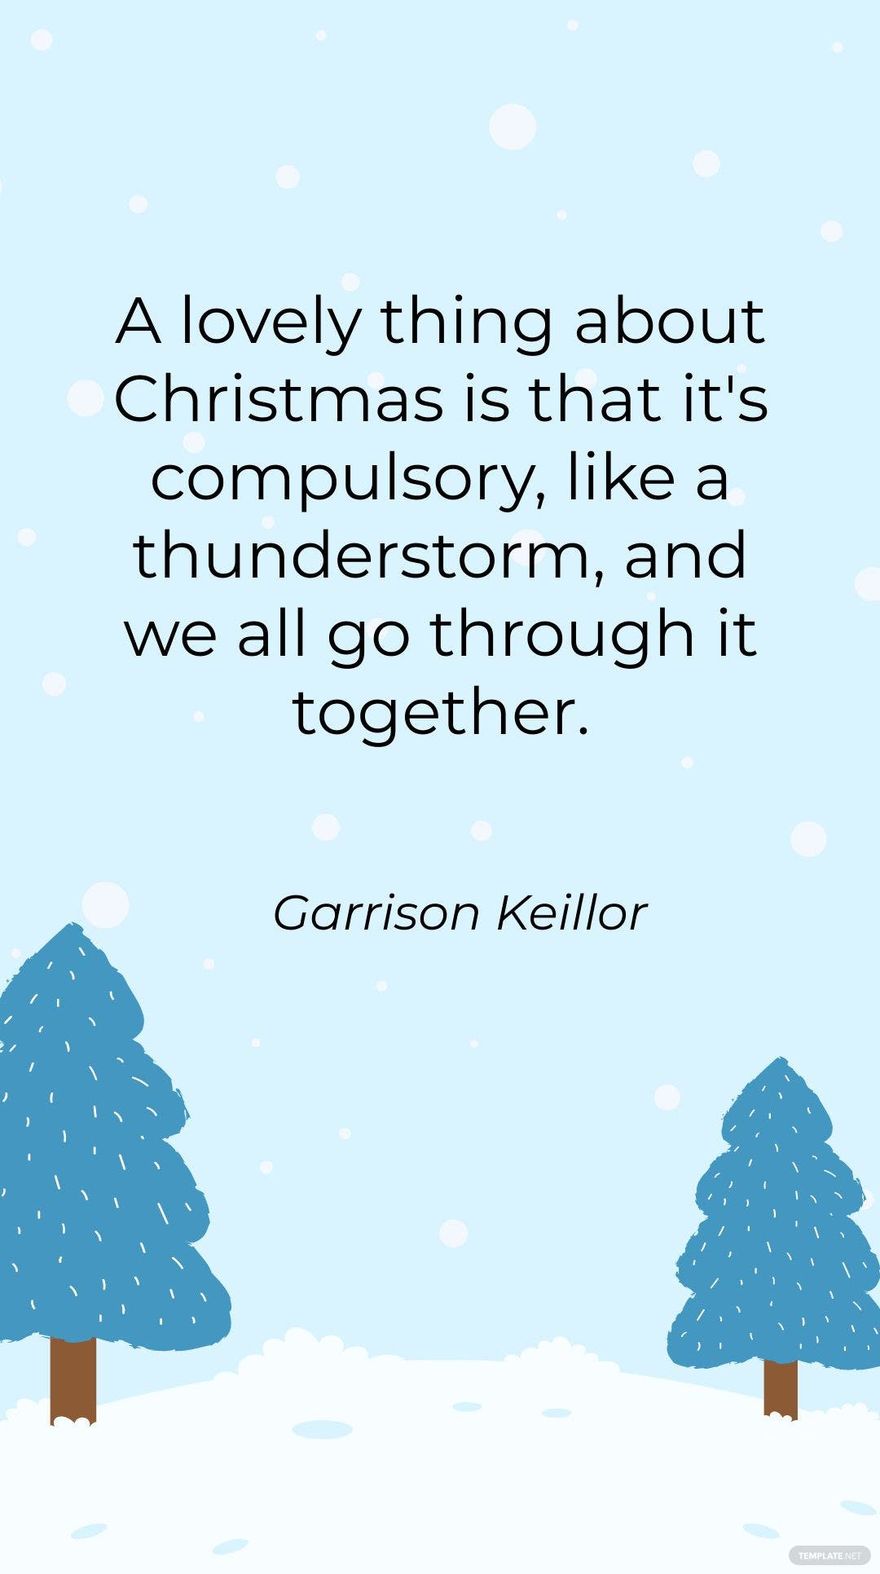 Free Garrison Keillor - A lovely thing about Christmas is that it's compulsory, like a thunderstorm, and we all go through it together.